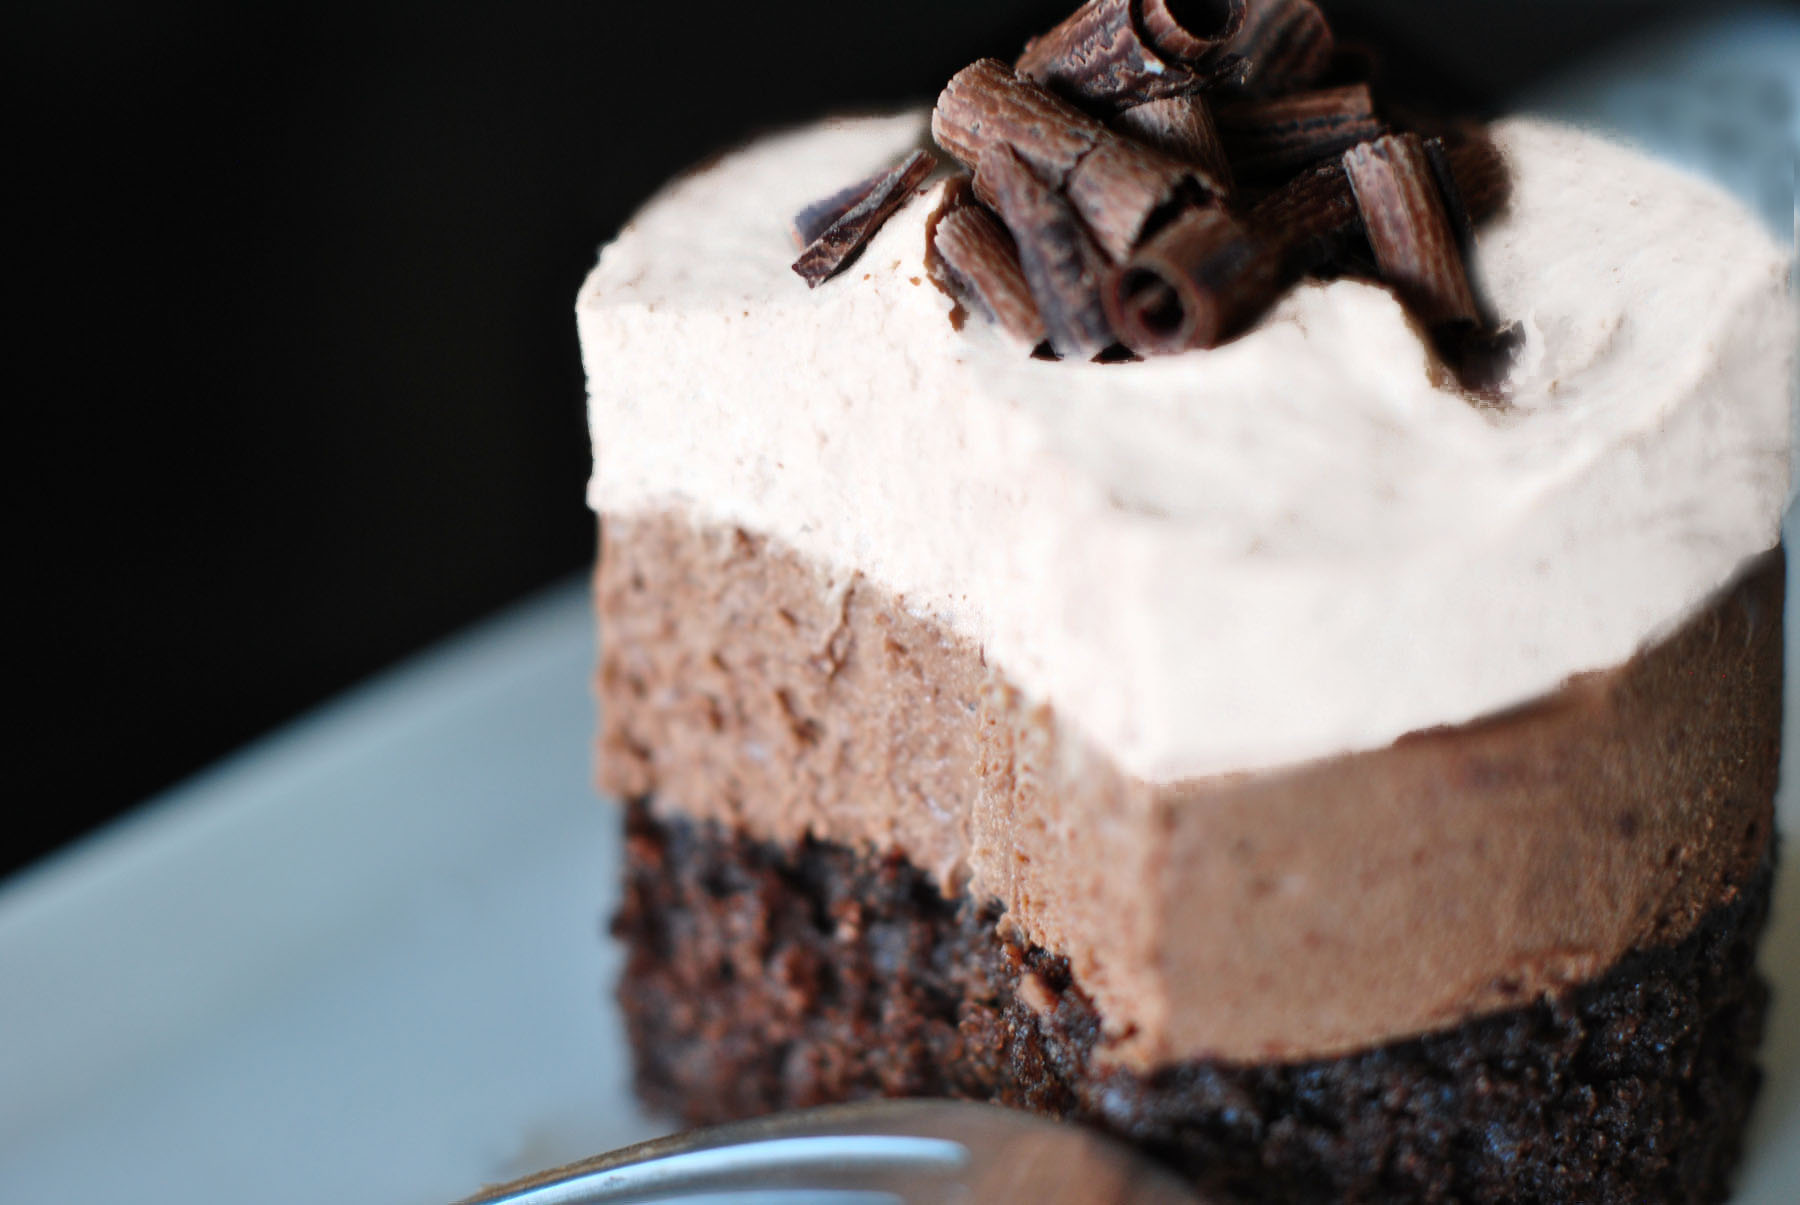 This Triple Chocolate Mouse Cake is a real show stopper! It's got three